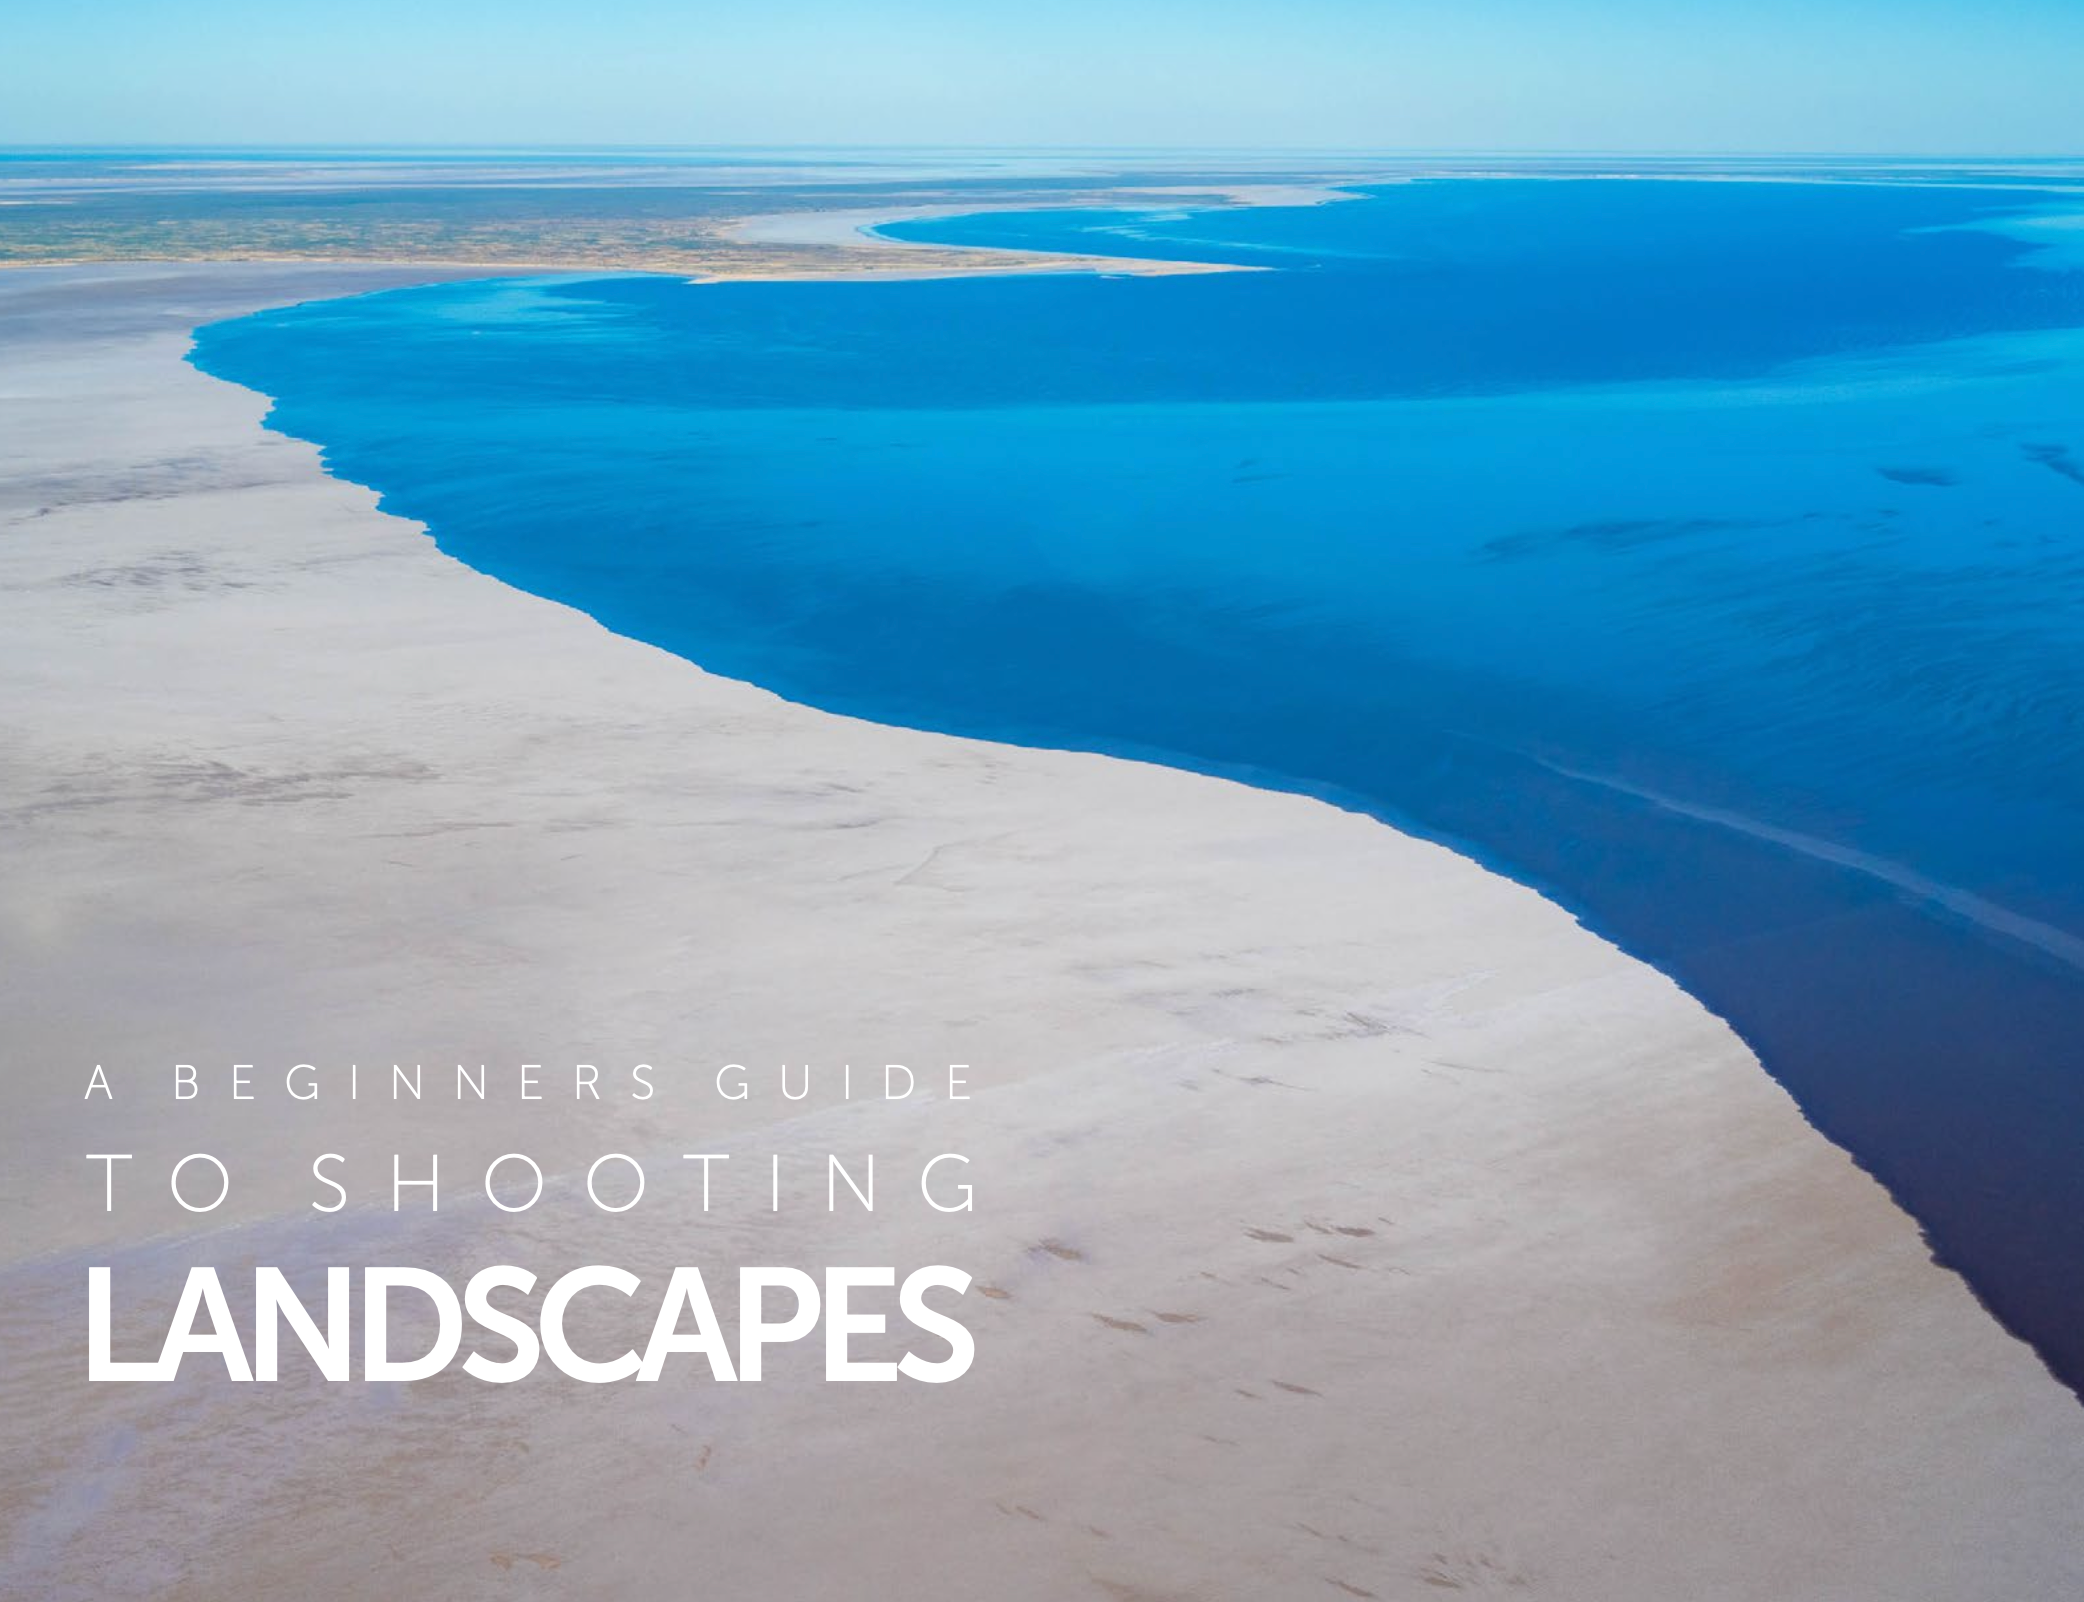 A Beginners Guide to Shooting Landscapes